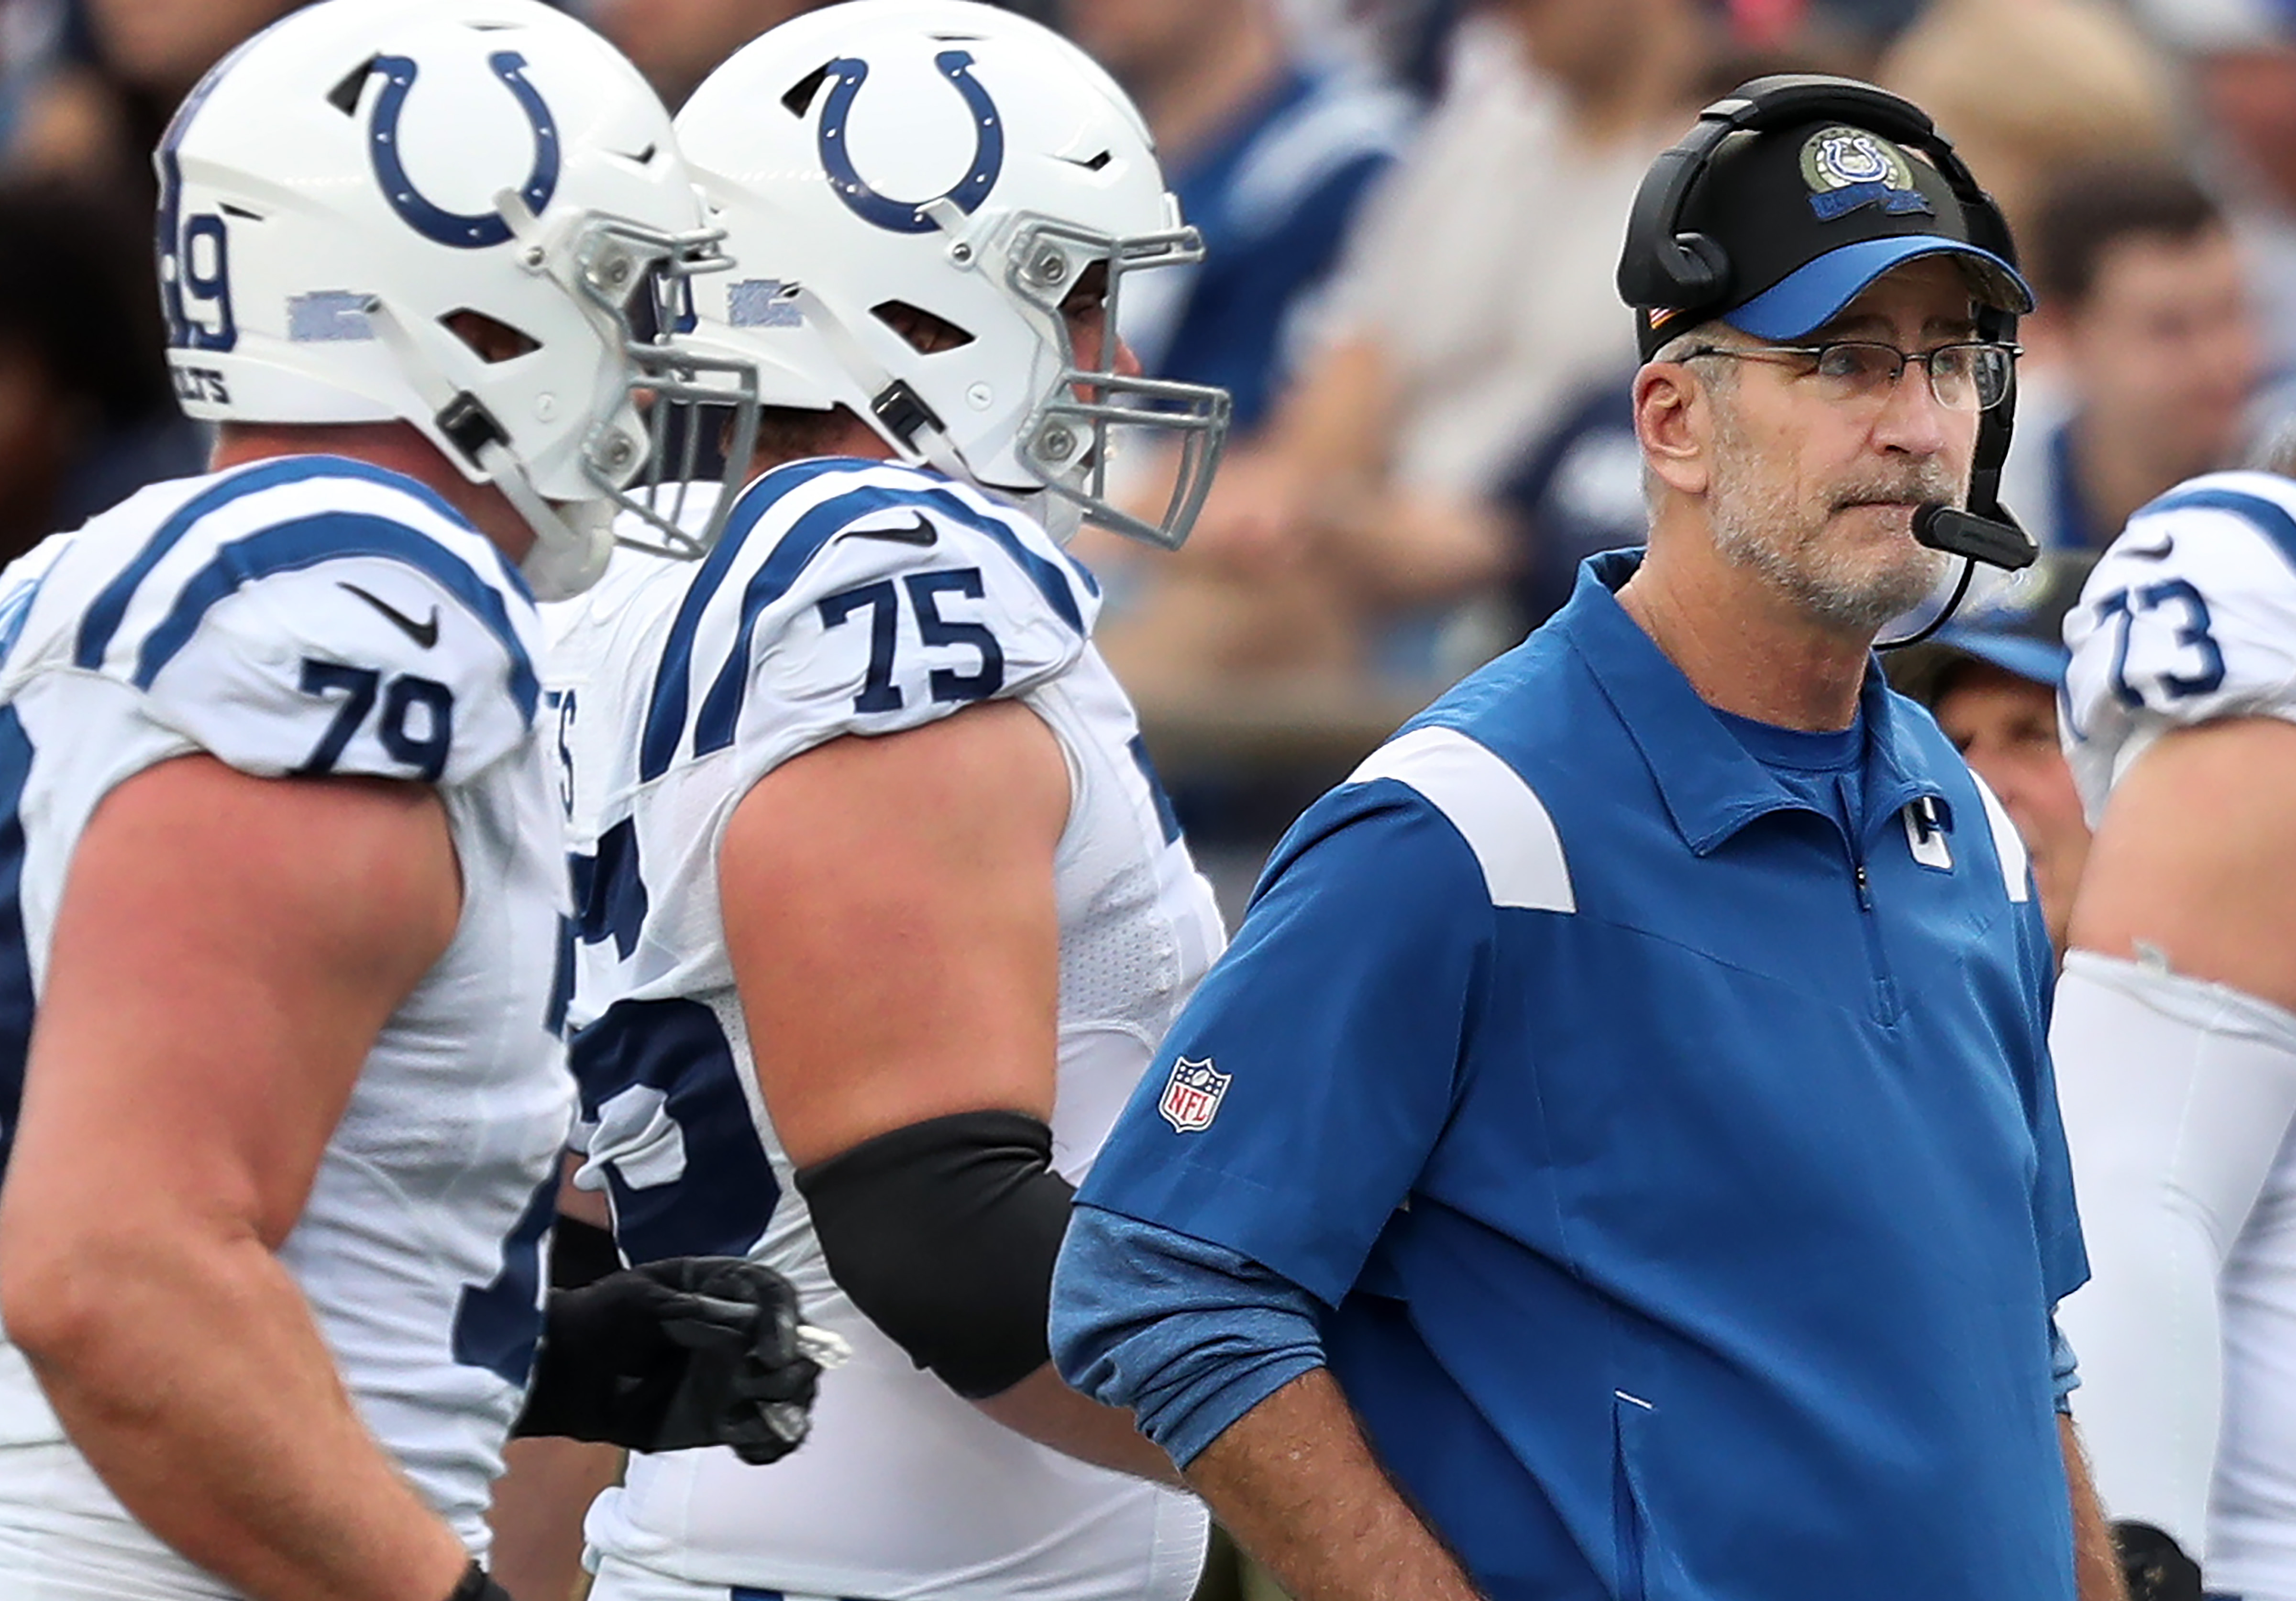 Colts' interim boss Jeff Saturday WINS on his NFL coaching debut